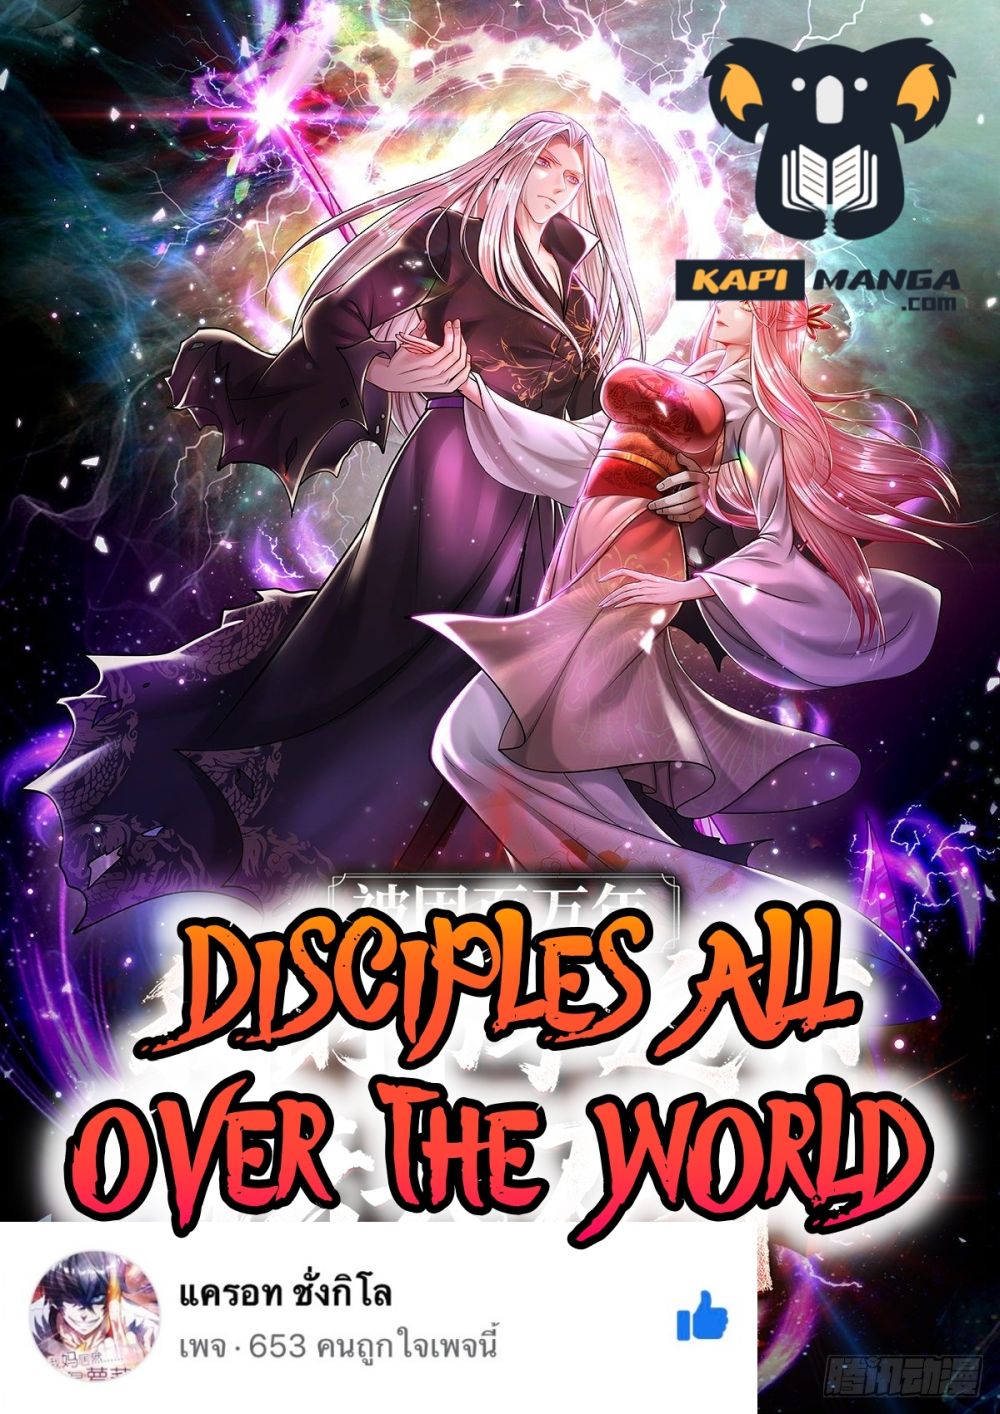 Disciples All Over the World à¸à¸­à¸à¸à¸µà¹ 54 (1)